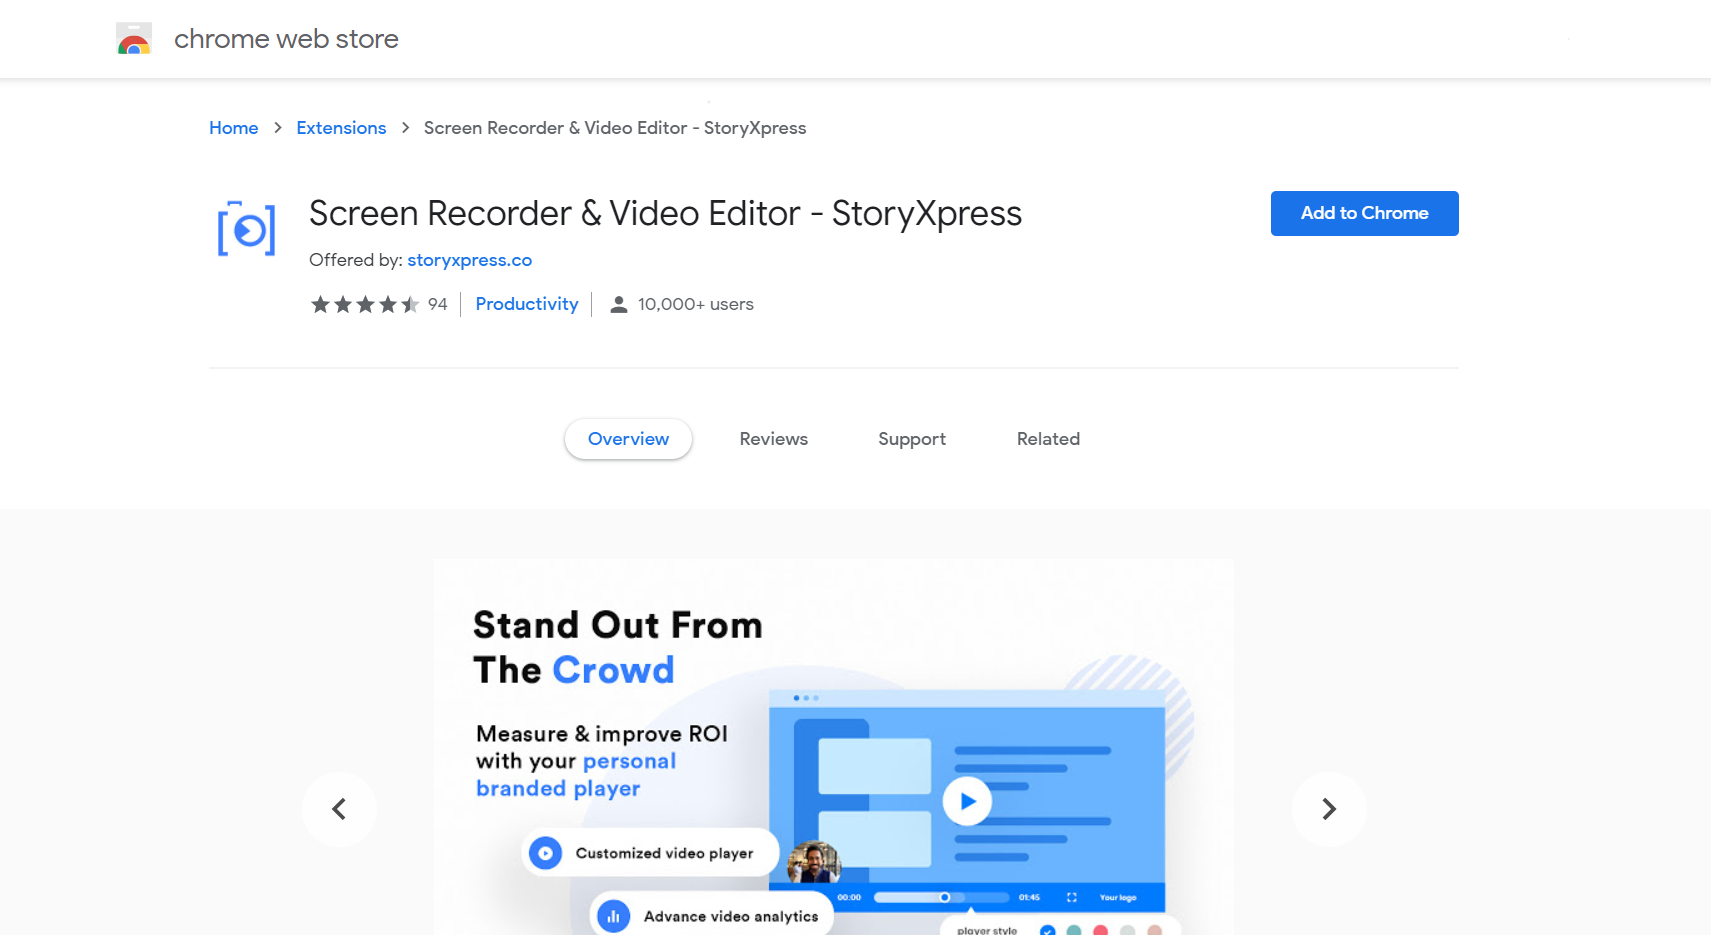 The landing page of a Chrome Extension - StoryXpress Recorder